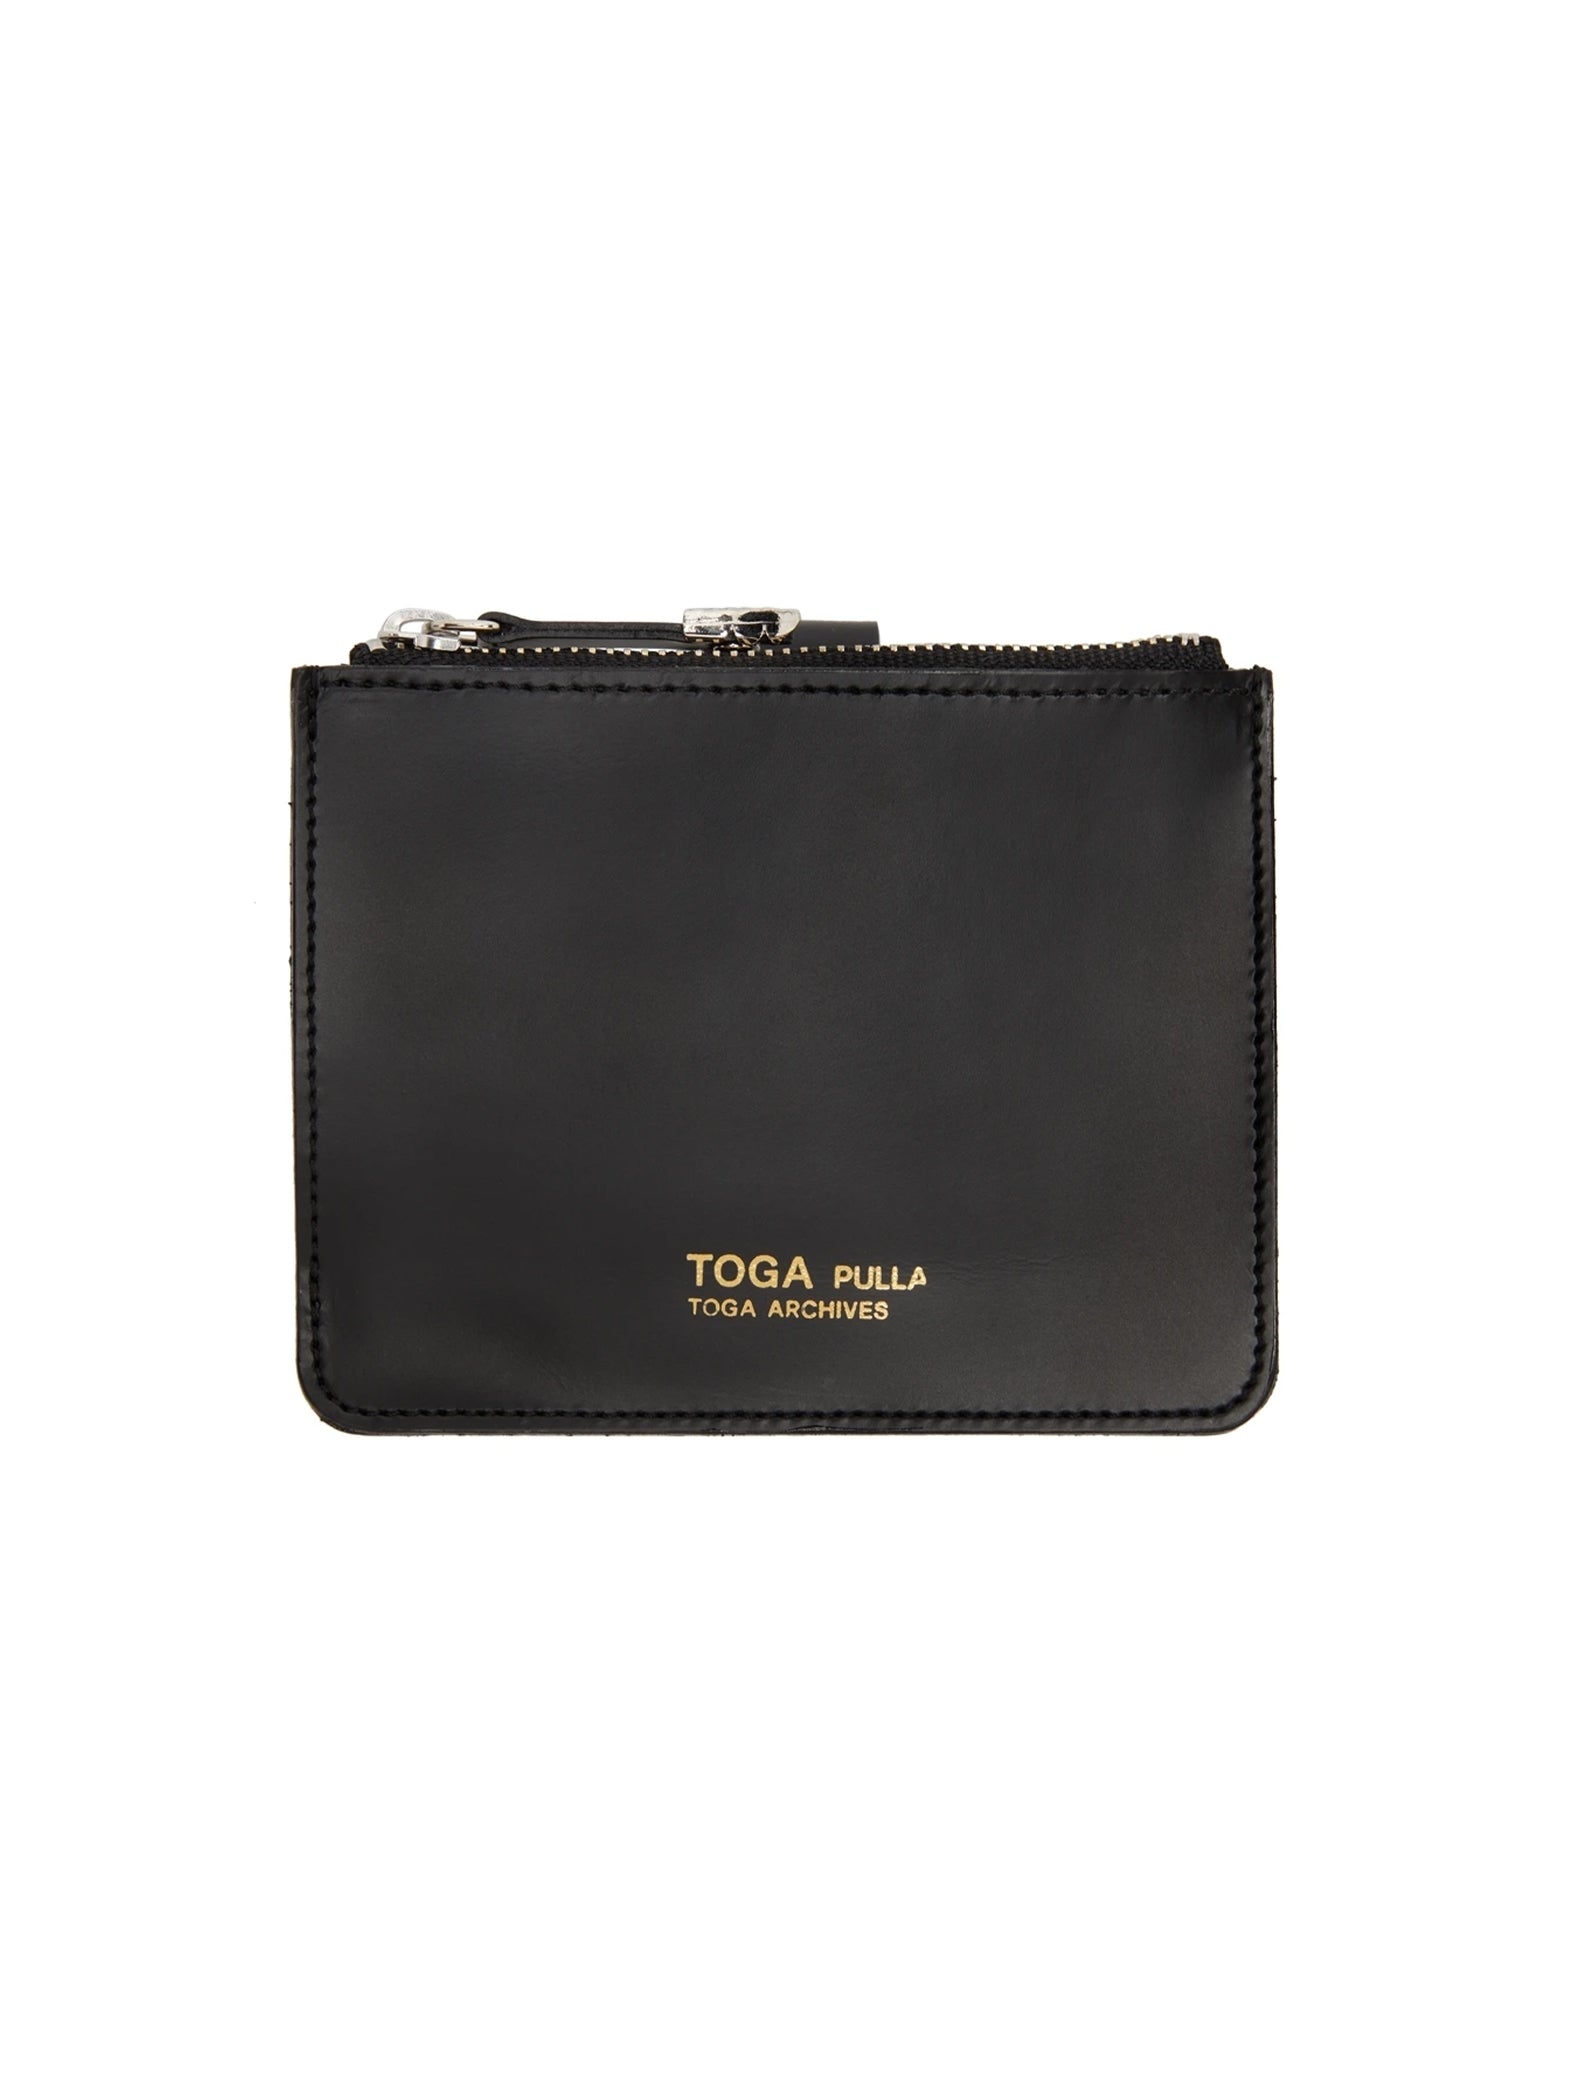 Toga Pulla Leather Wallet